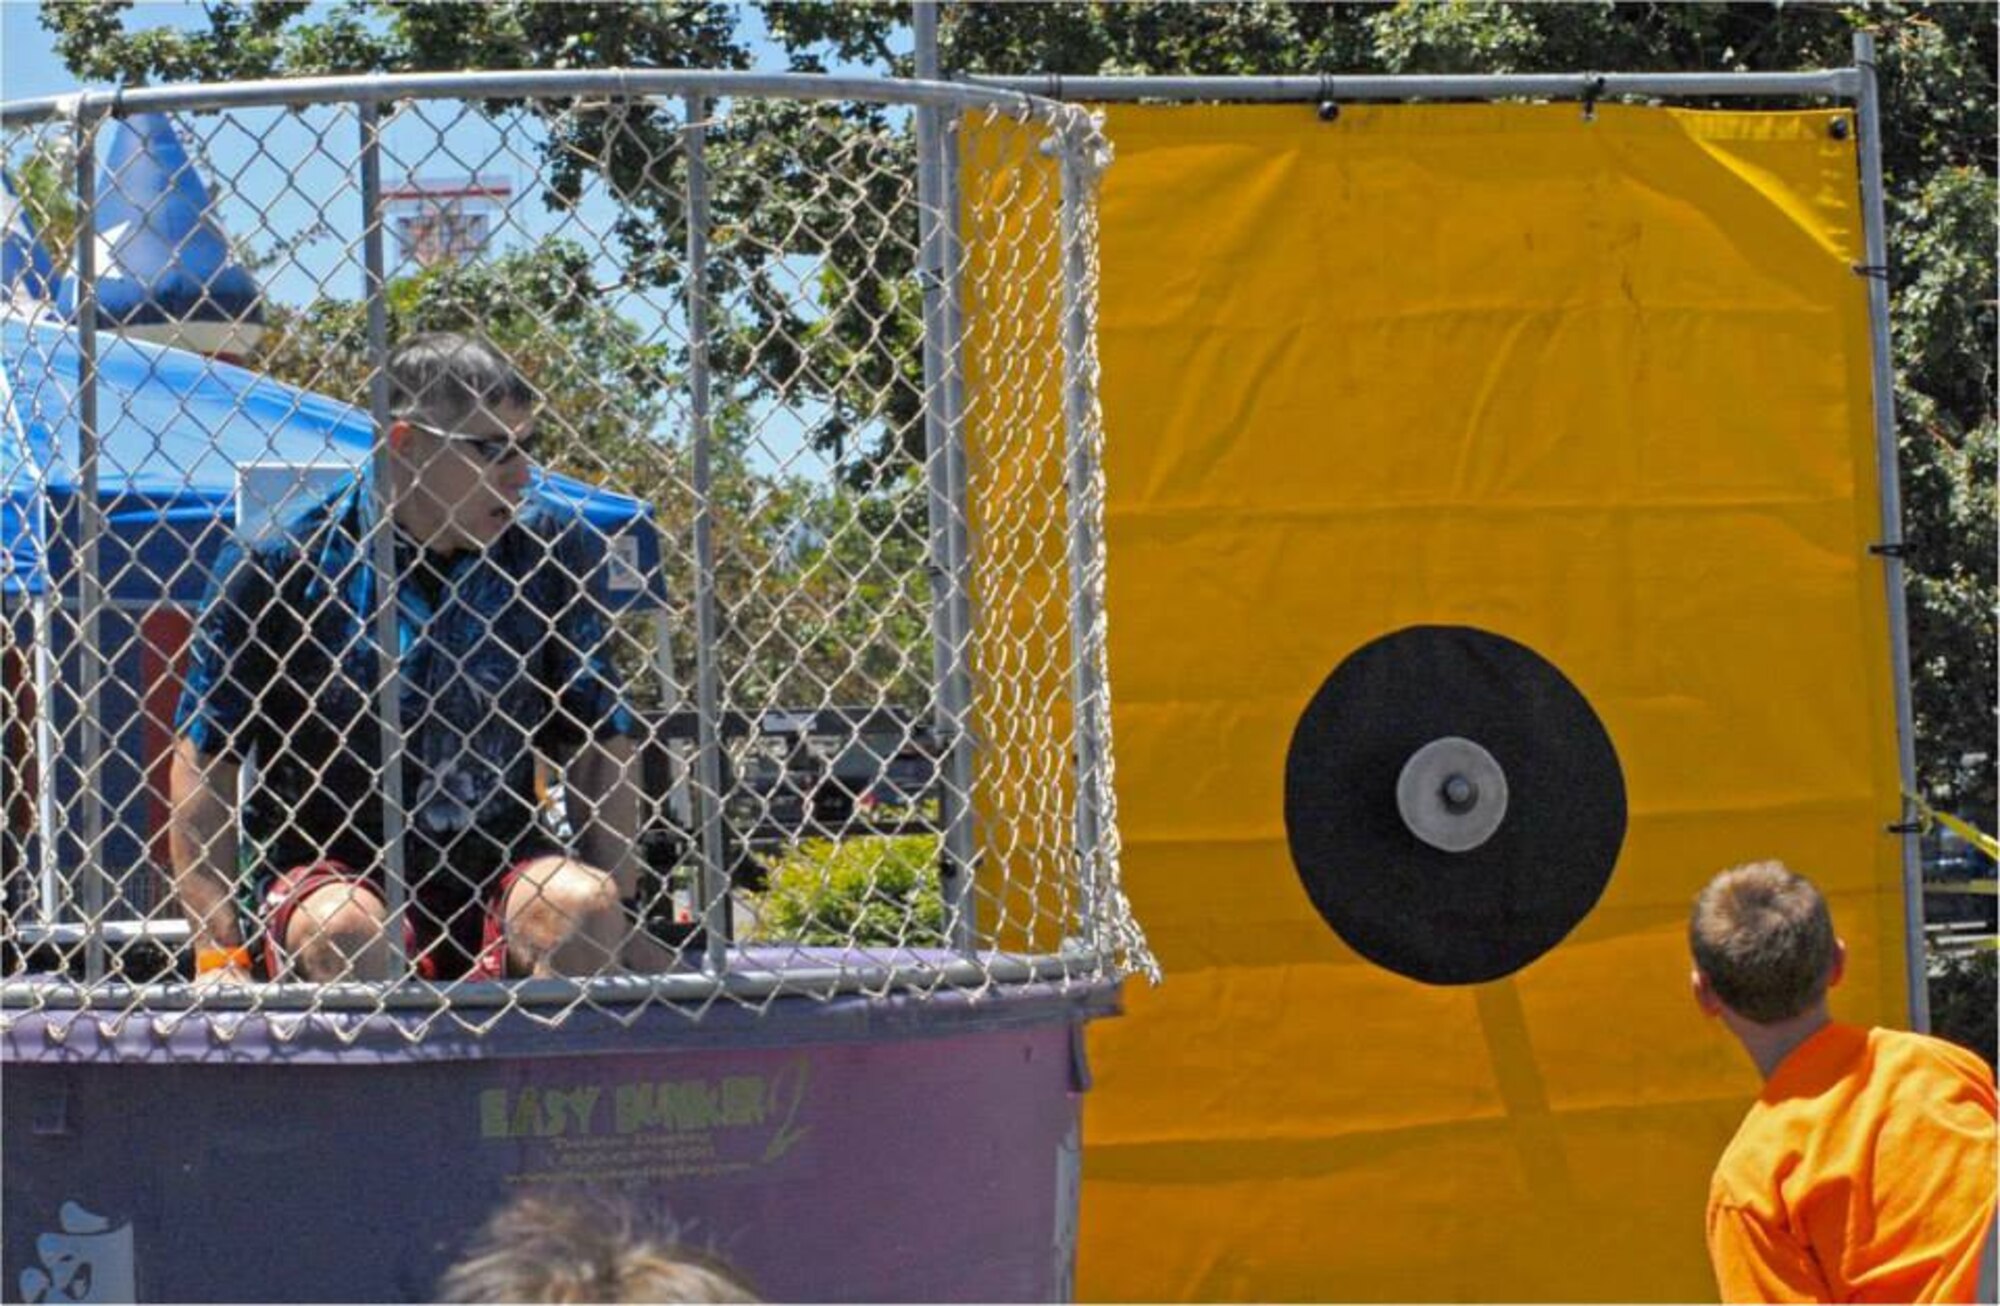 152AW CC Col. Burkett preparing to be "dunked" again during the Nevada National Guard's "Family Day" on Saturday, 22 June at the Air Base in Reno.  More than 2,000 Airmen, friends and family members attended the event.  NV ANG photo by Capt. Jason Yuhasz 152AW/PA (released).